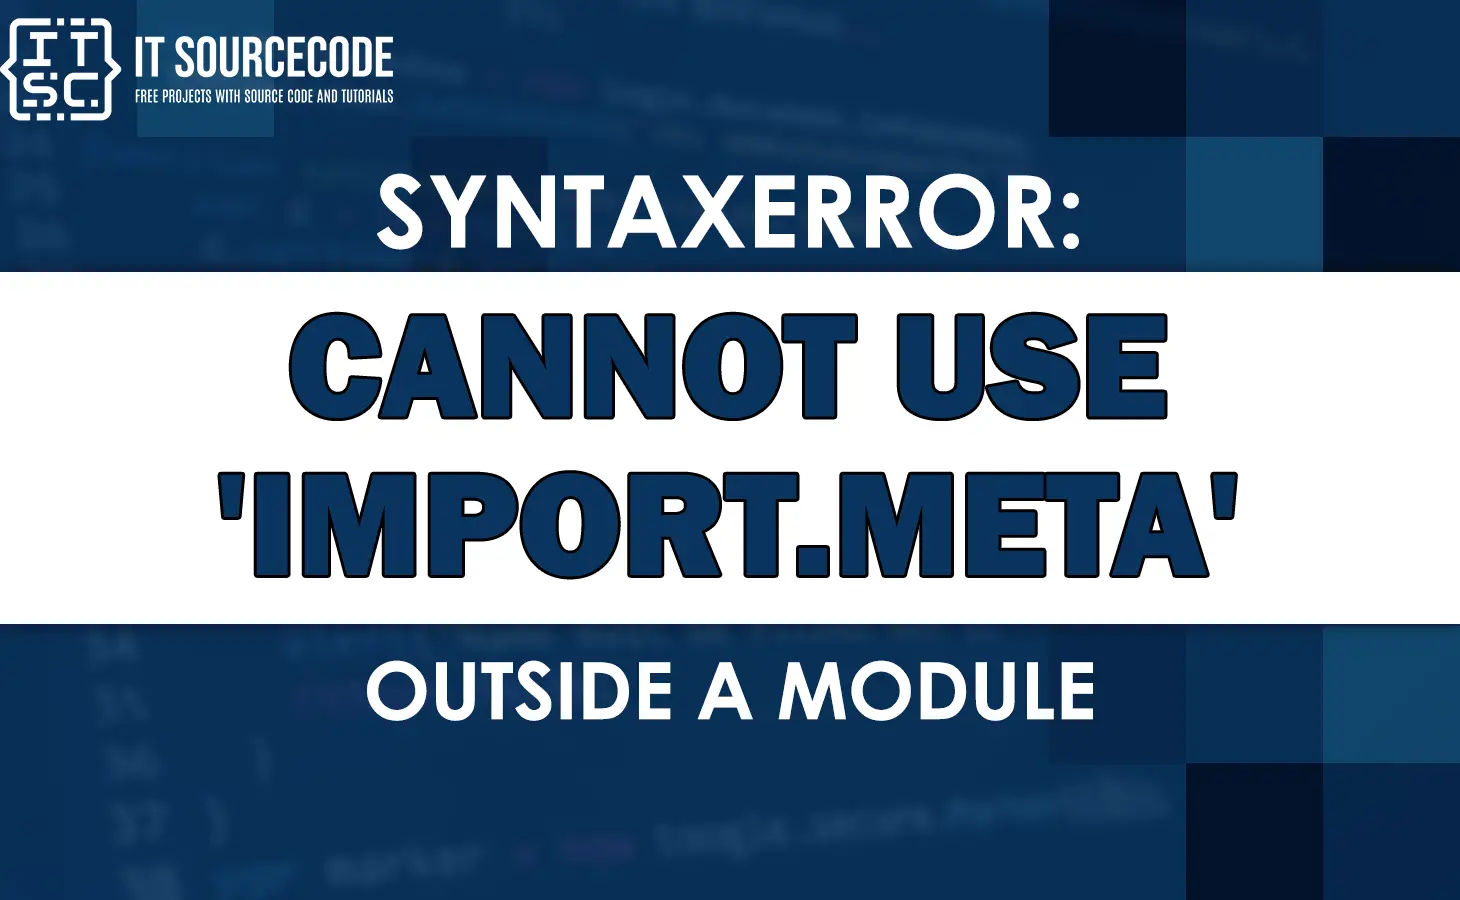 Syntaxerror: cannot use 'import.meta' outside a module